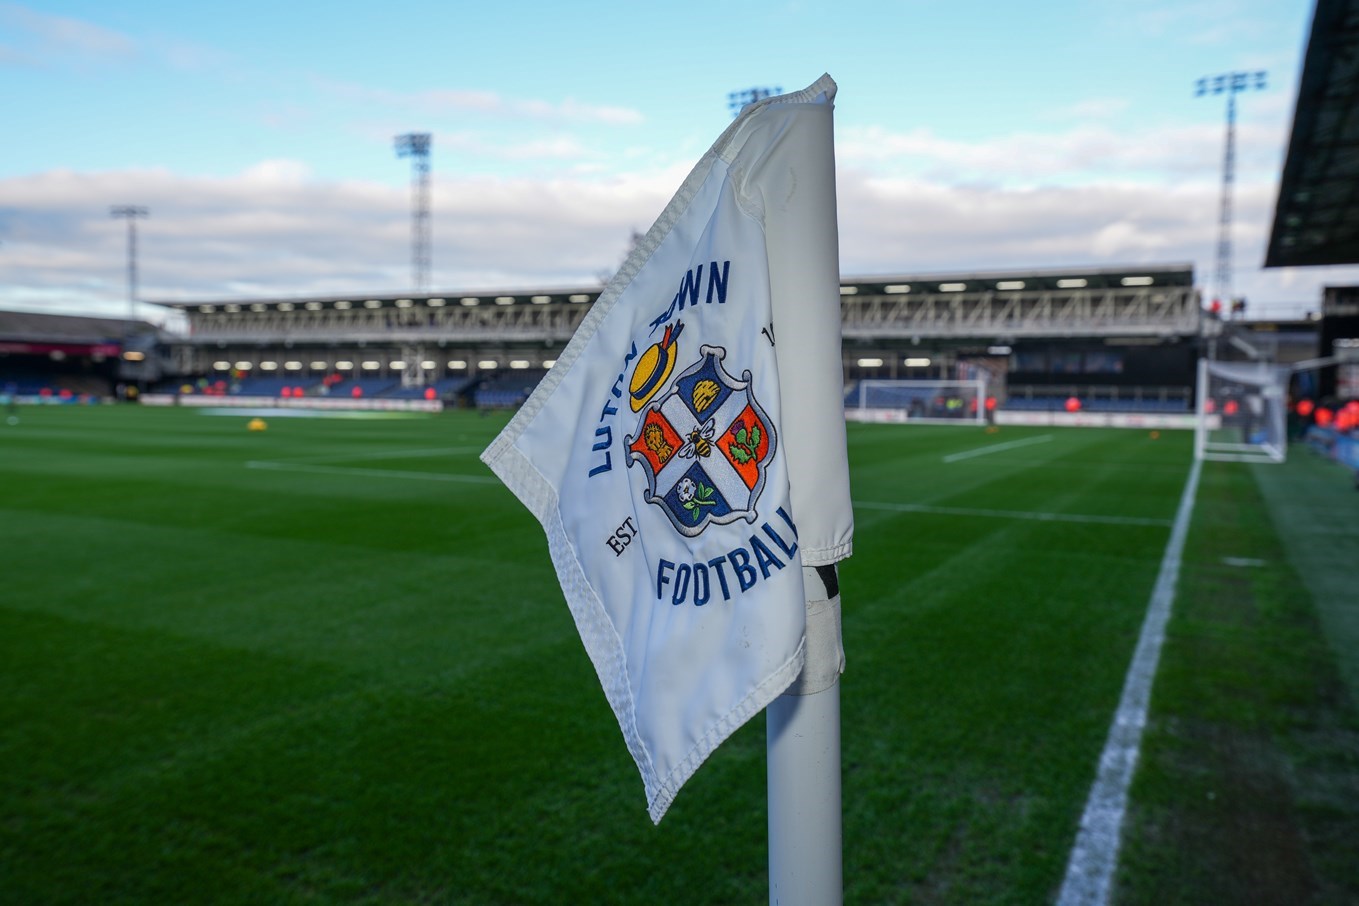 Club Statement | Inappropriate Chanting | News | Luton Town FC